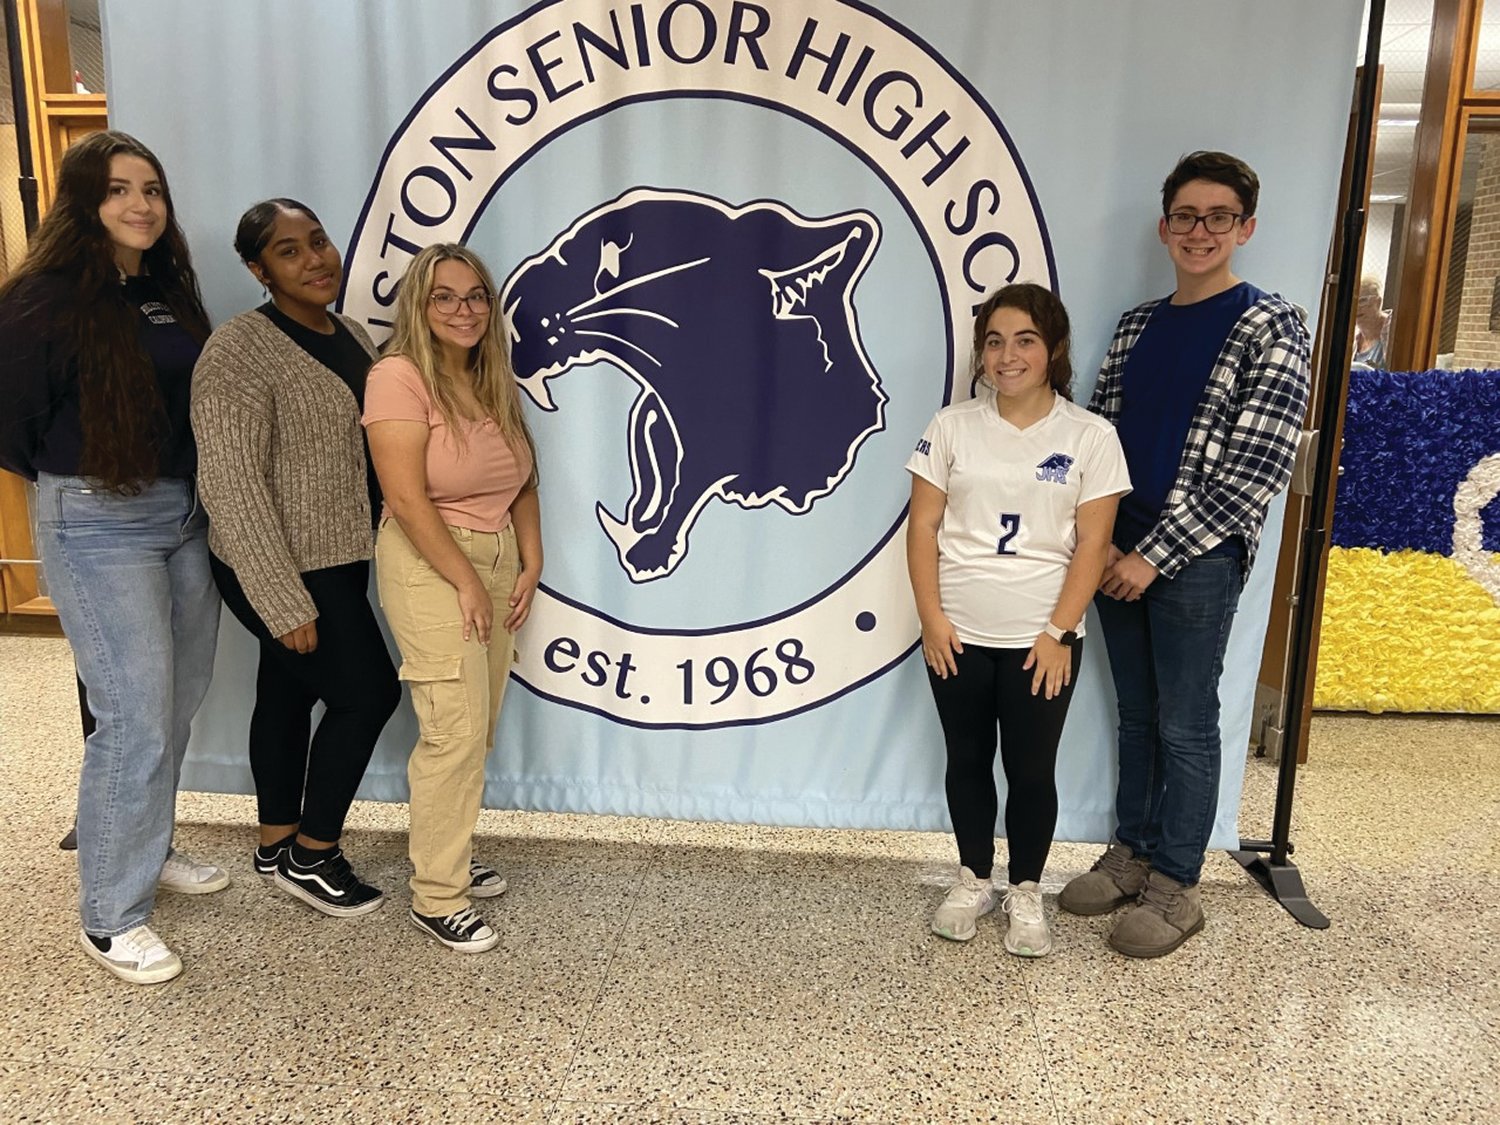 PHILANTHROPIC PANTHERS: JHS Student Council Officers for the 2022-23 academic year at JHS are from left: Talia LaFlamme, Raylin Santos, Michealina Irons, Alexia DiLorenzo and Charlie Curci.